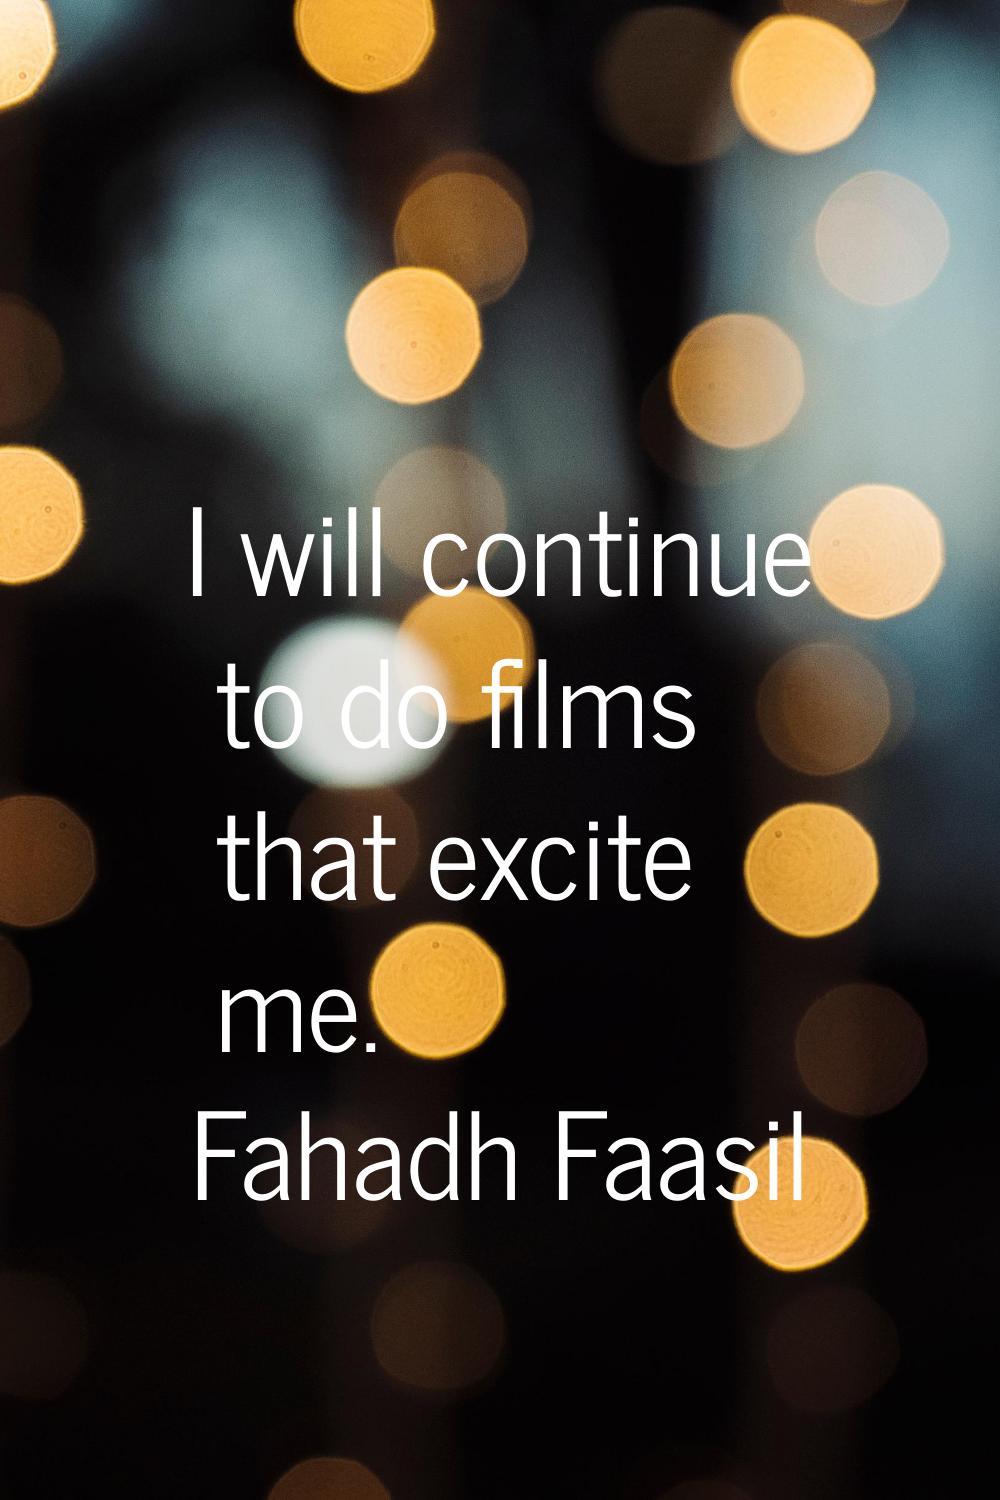 I will continue to do films that excite me.